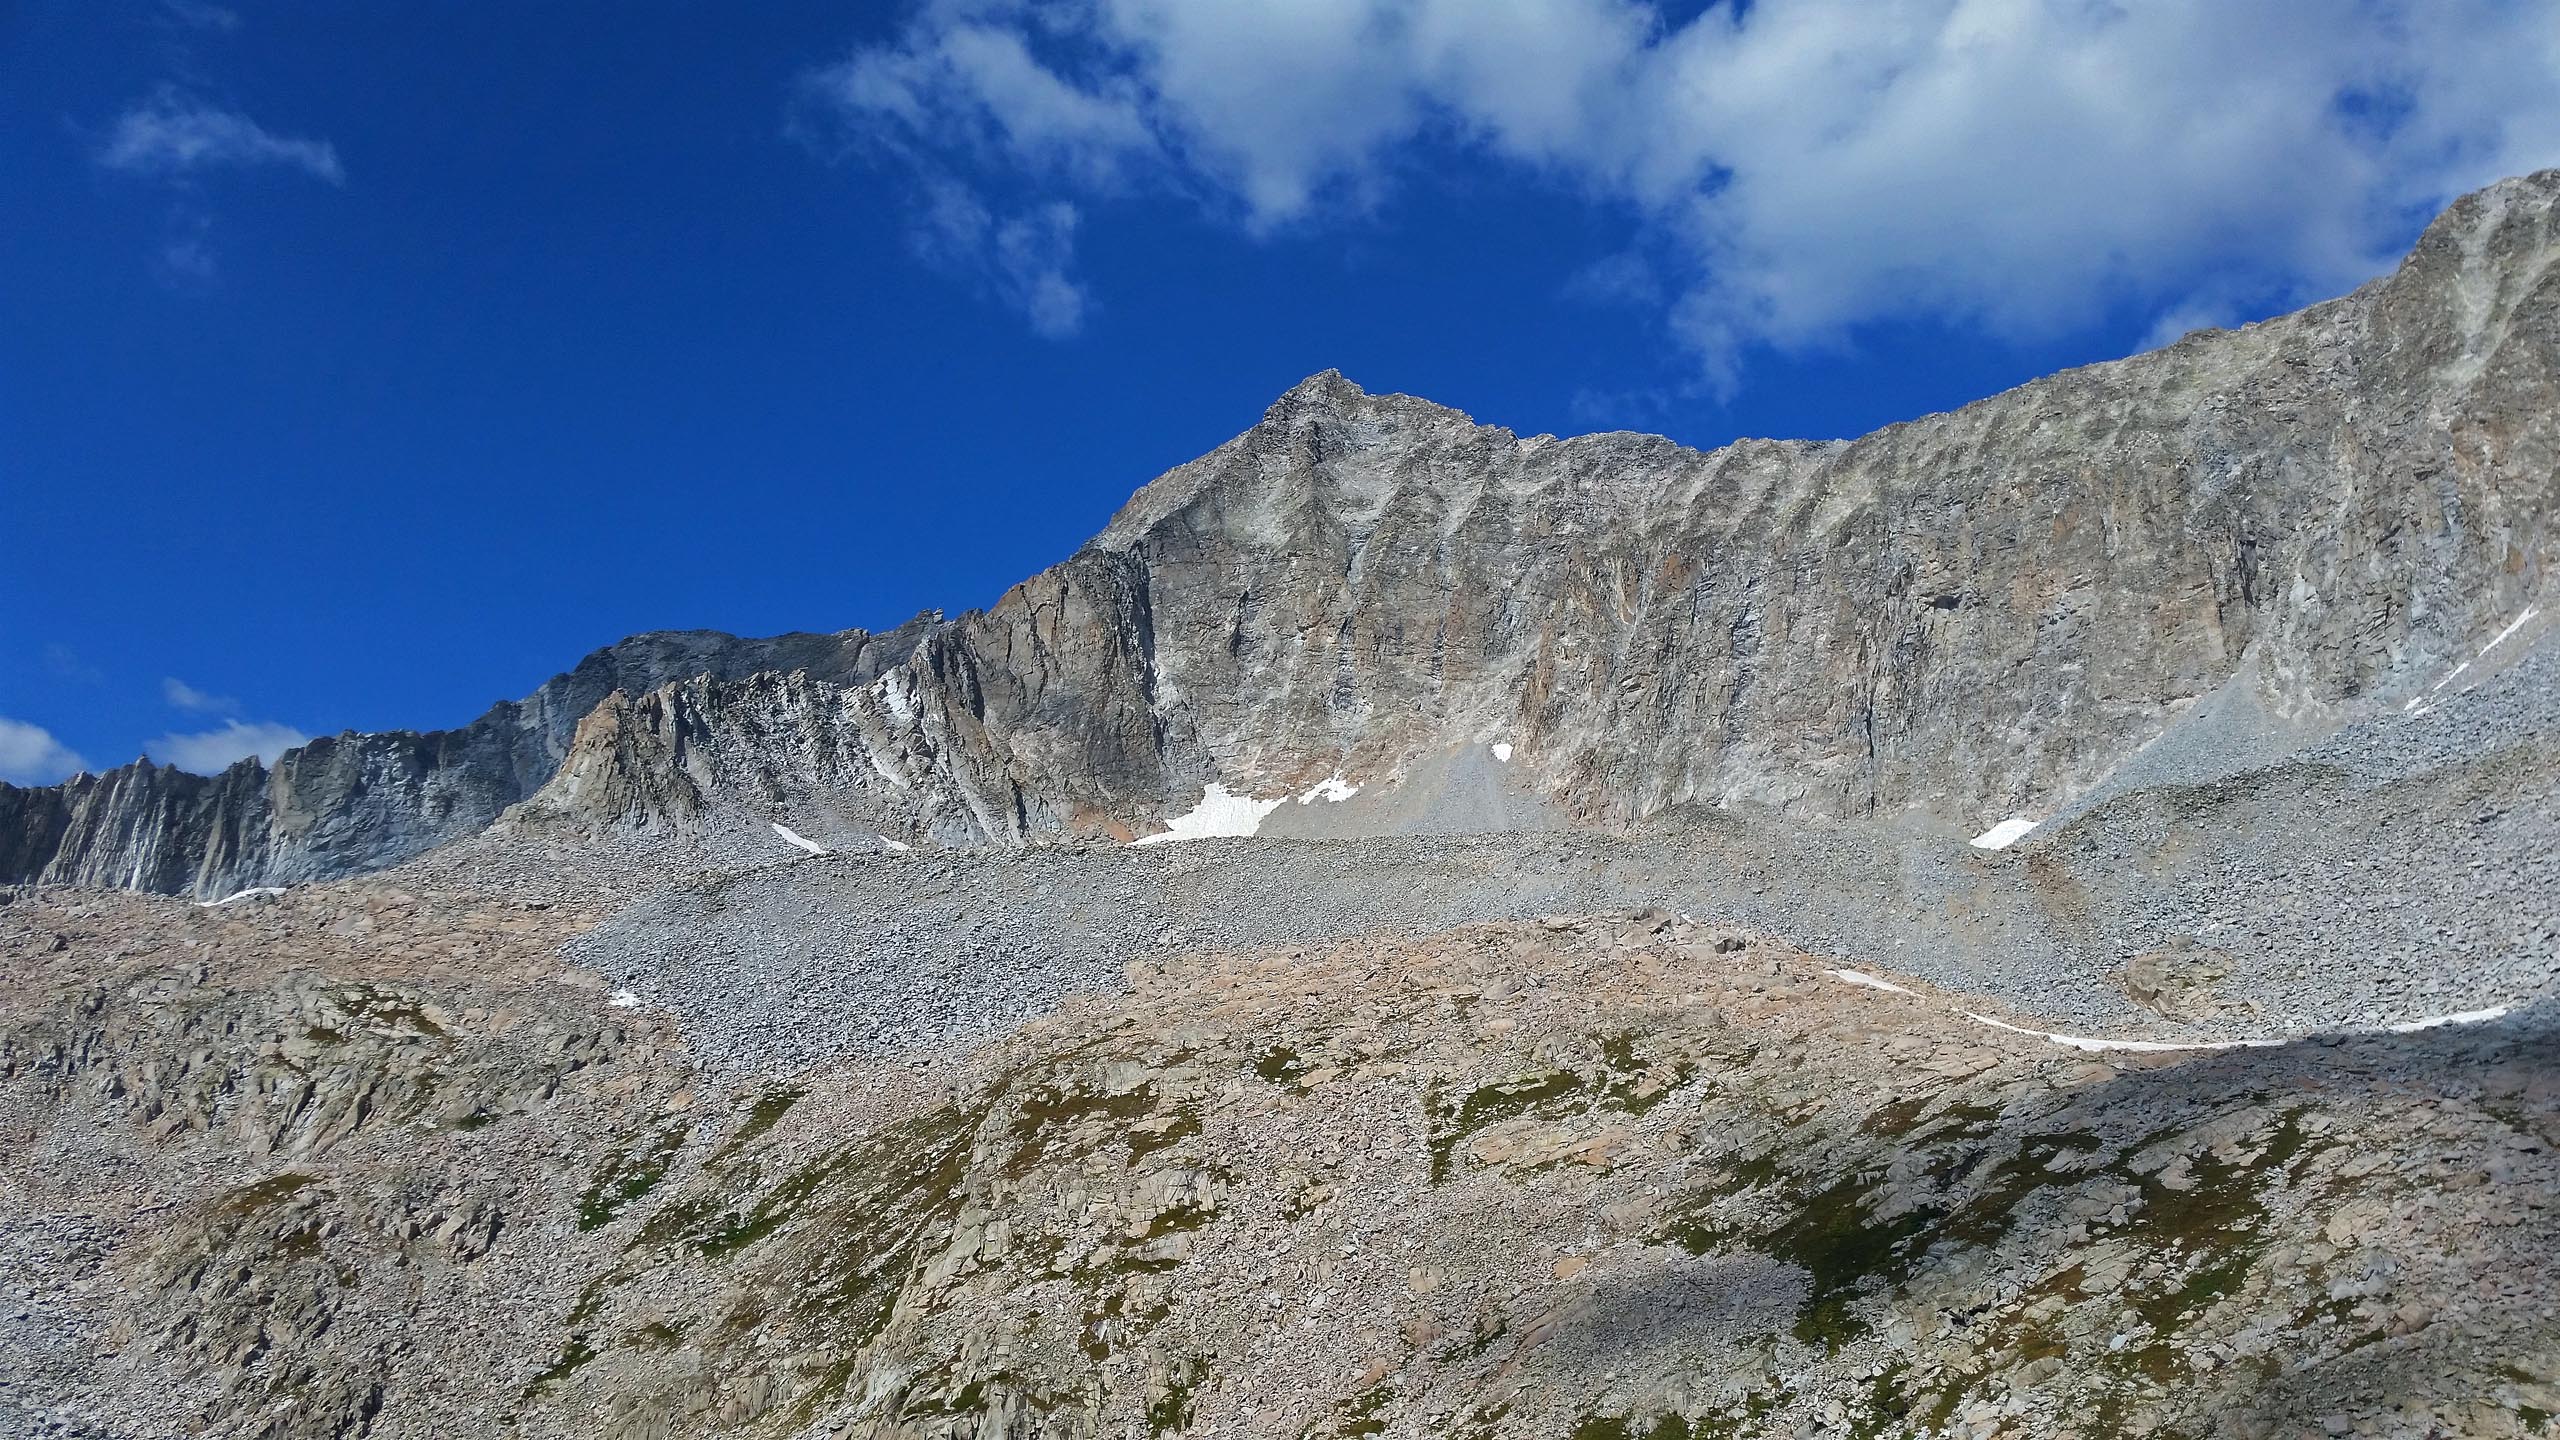 Capitol Peak, and the Knife Edge seen from Pierre Lakes Basin